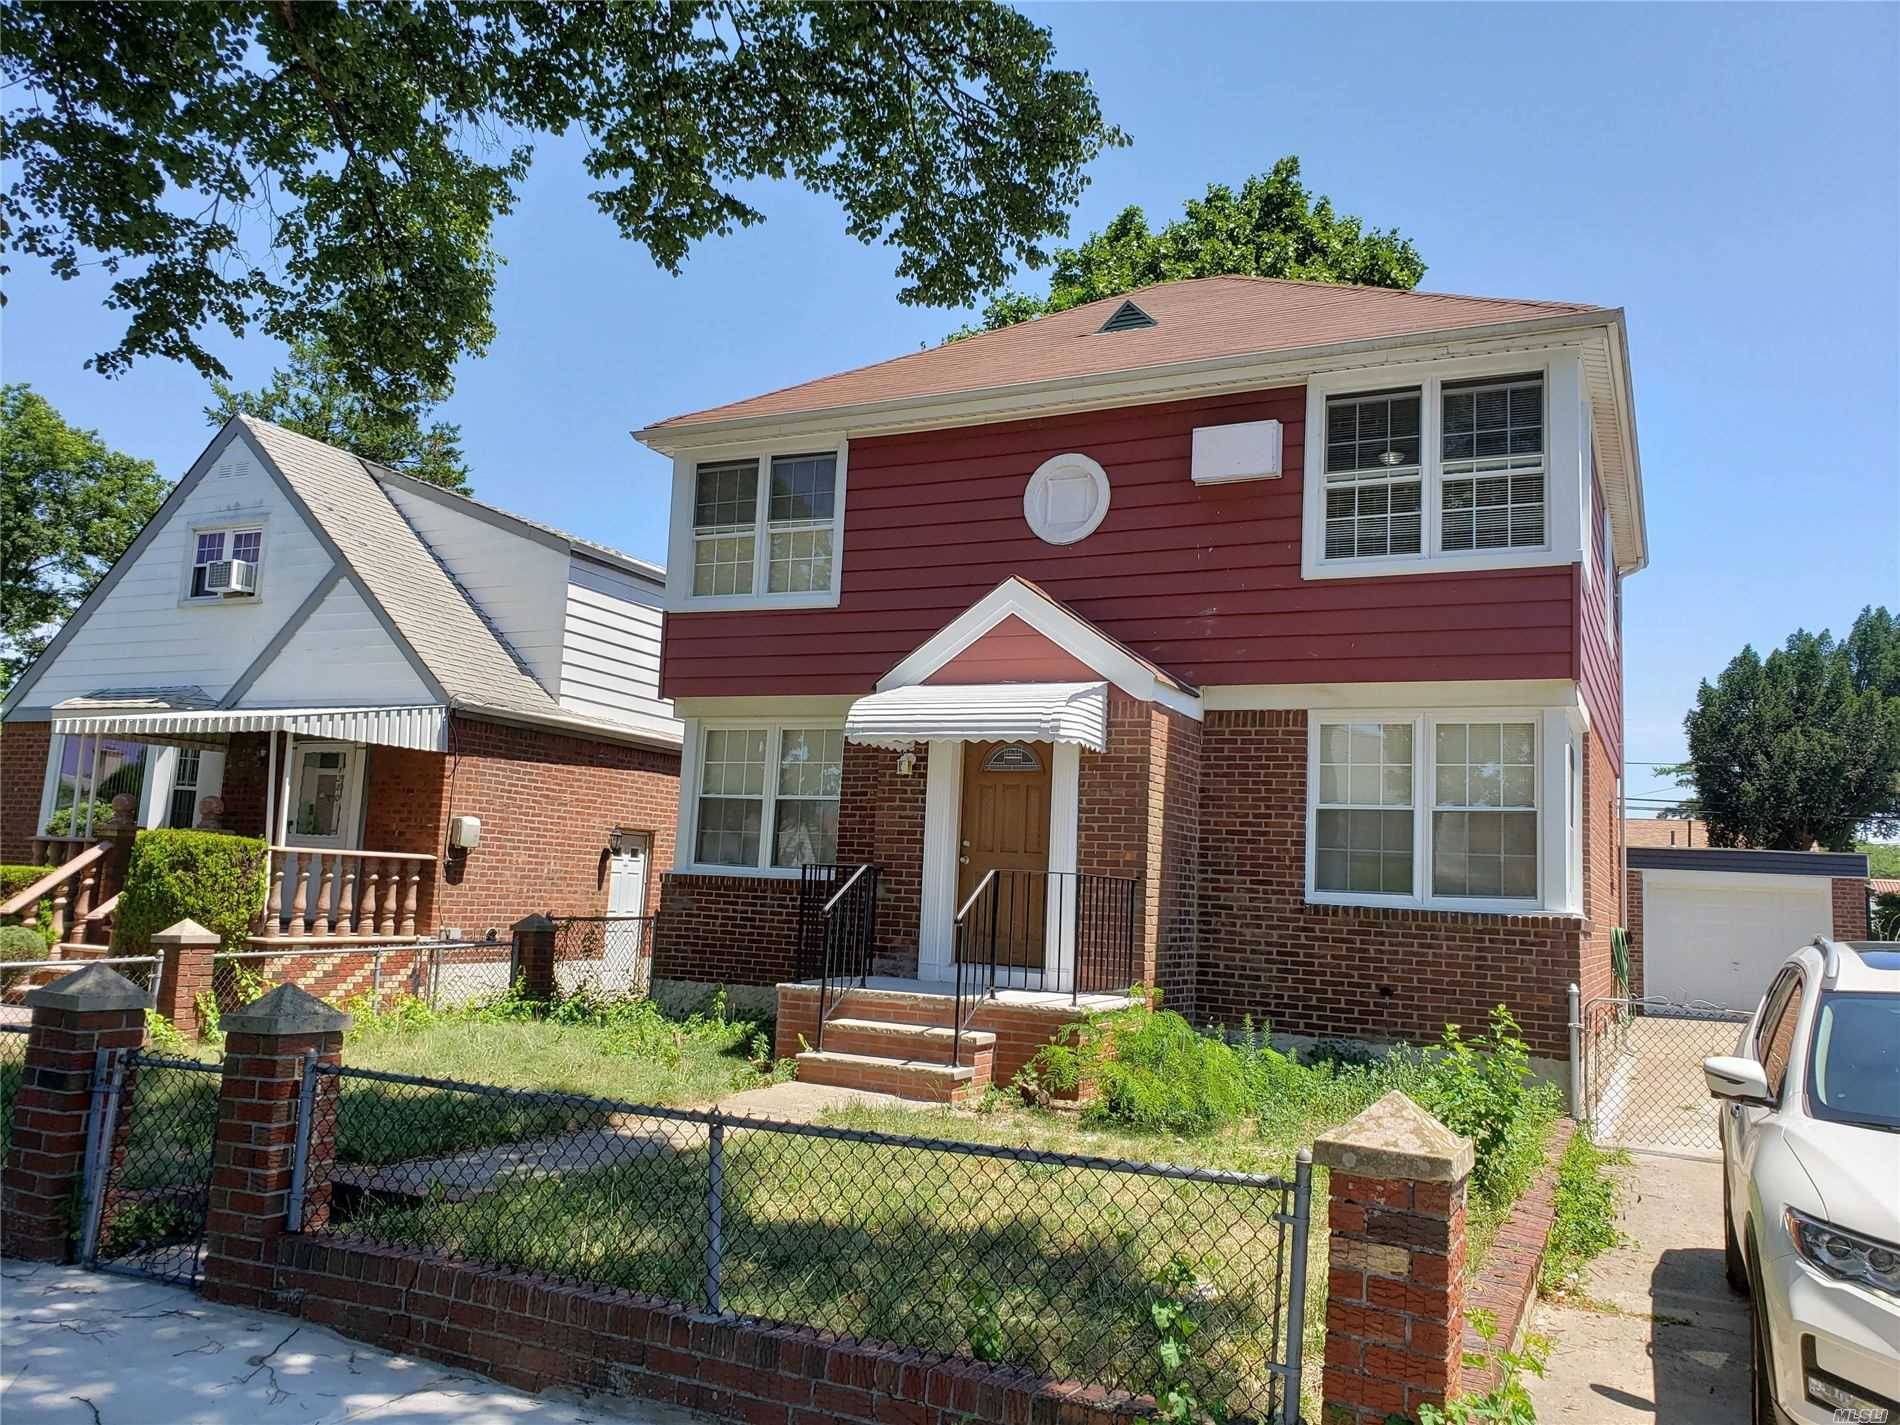 This huge 1 family home located in the heart of cambria heights features huge 3 bedrooms, 3 1 2 bath, huge finished attic.